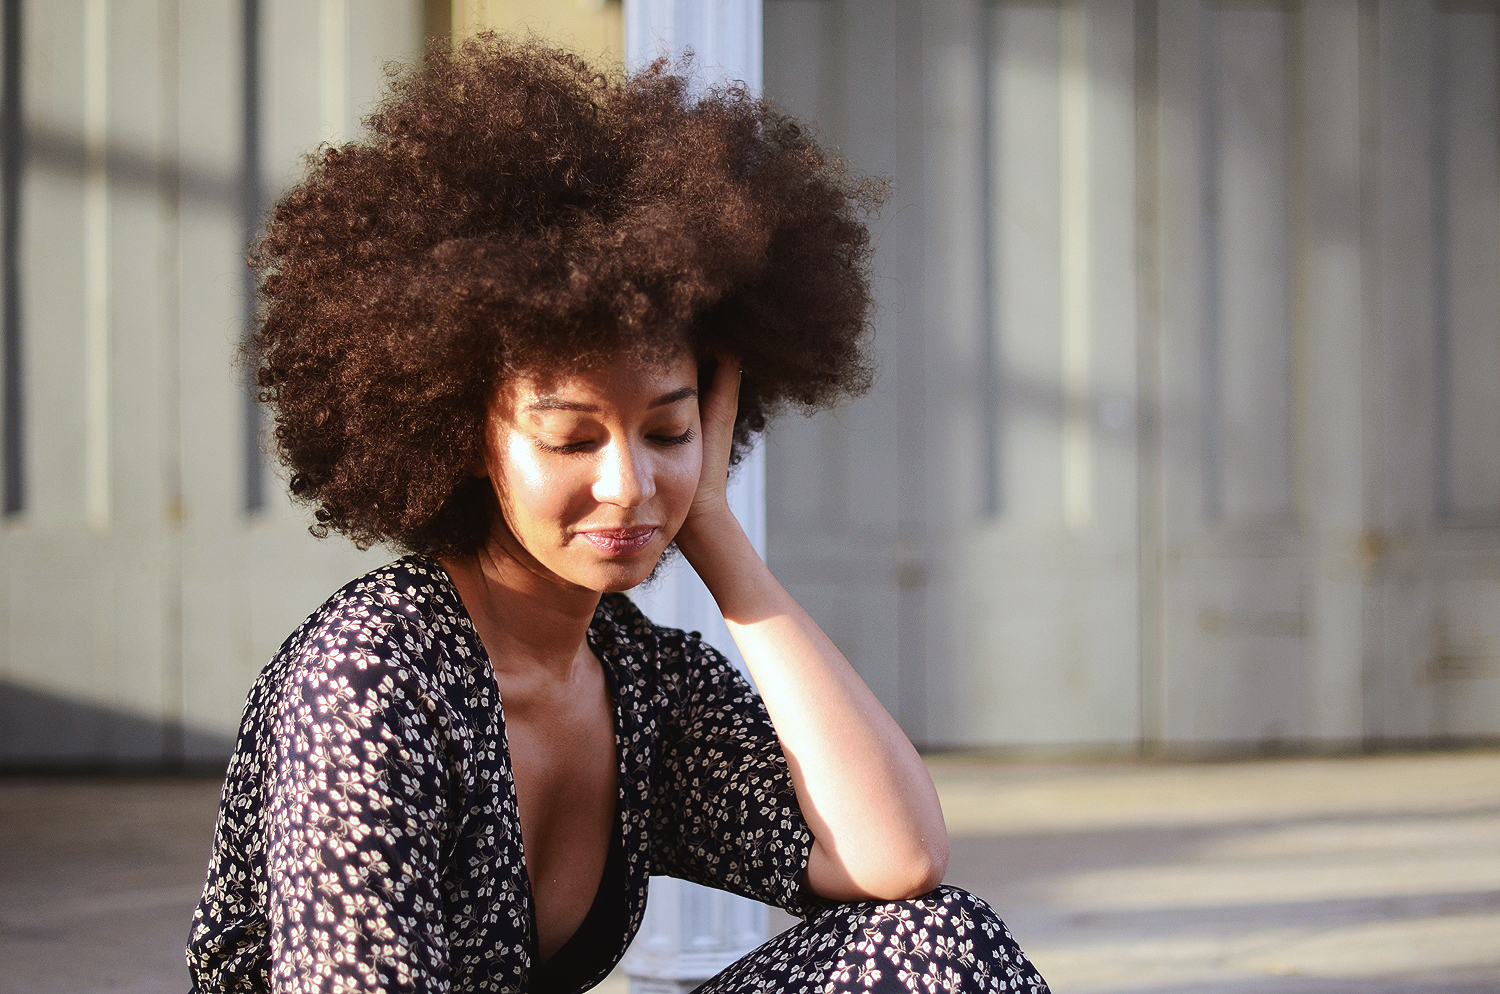 mercredie-blog-mode-geneve-blogueuse-bloggeuse-suisse-swiss-switzerland-robe-ganni-dress-floral-afro-hair-nappy-curly-curls-big-fro-cheveux-frises3-1